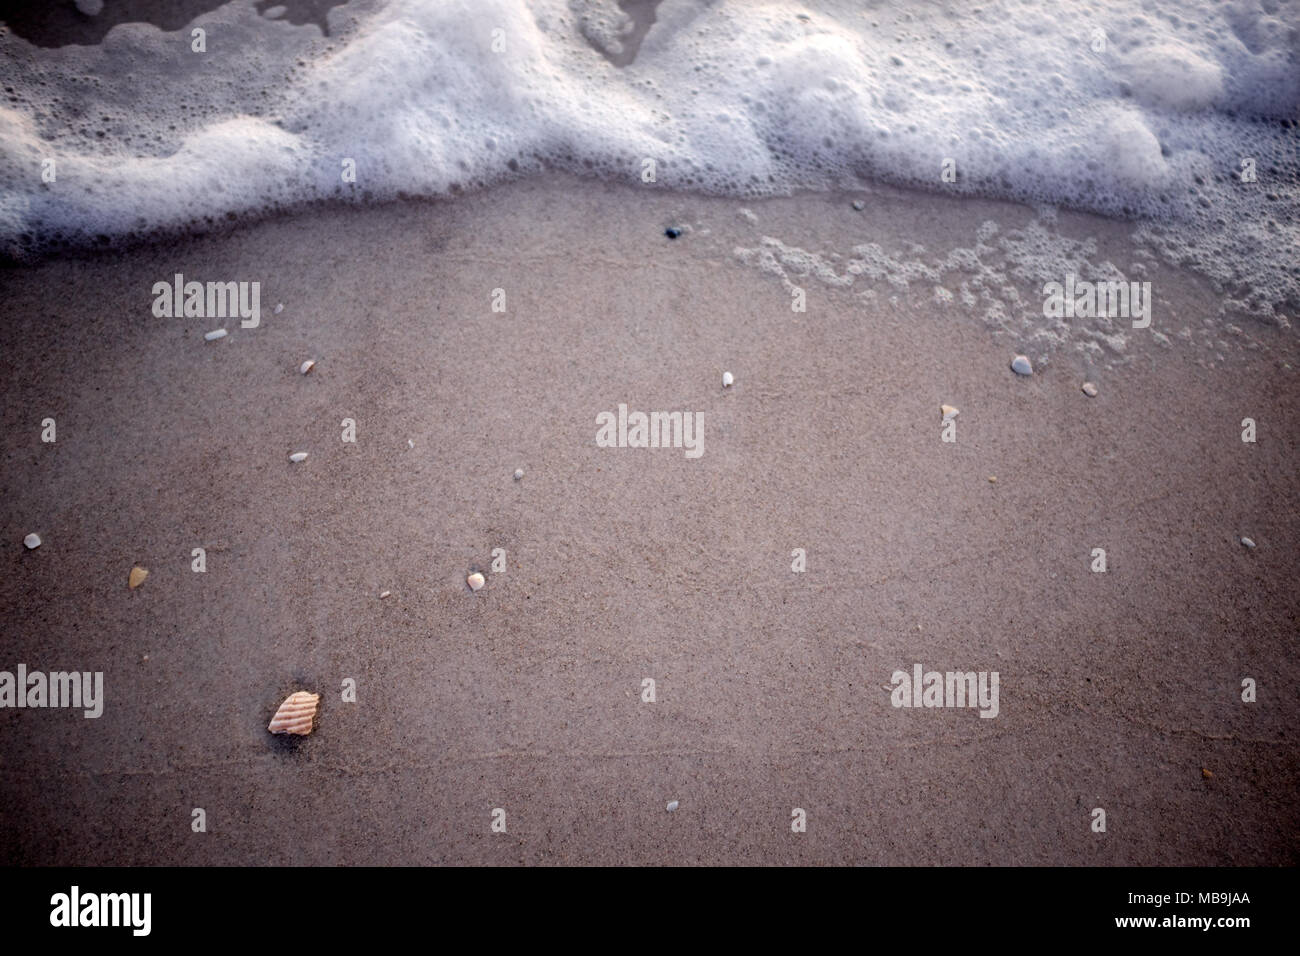 Foamy surf on wet beach sand forming a border with copy space on Anna Maria island, Florida in a marine background Stock Photo